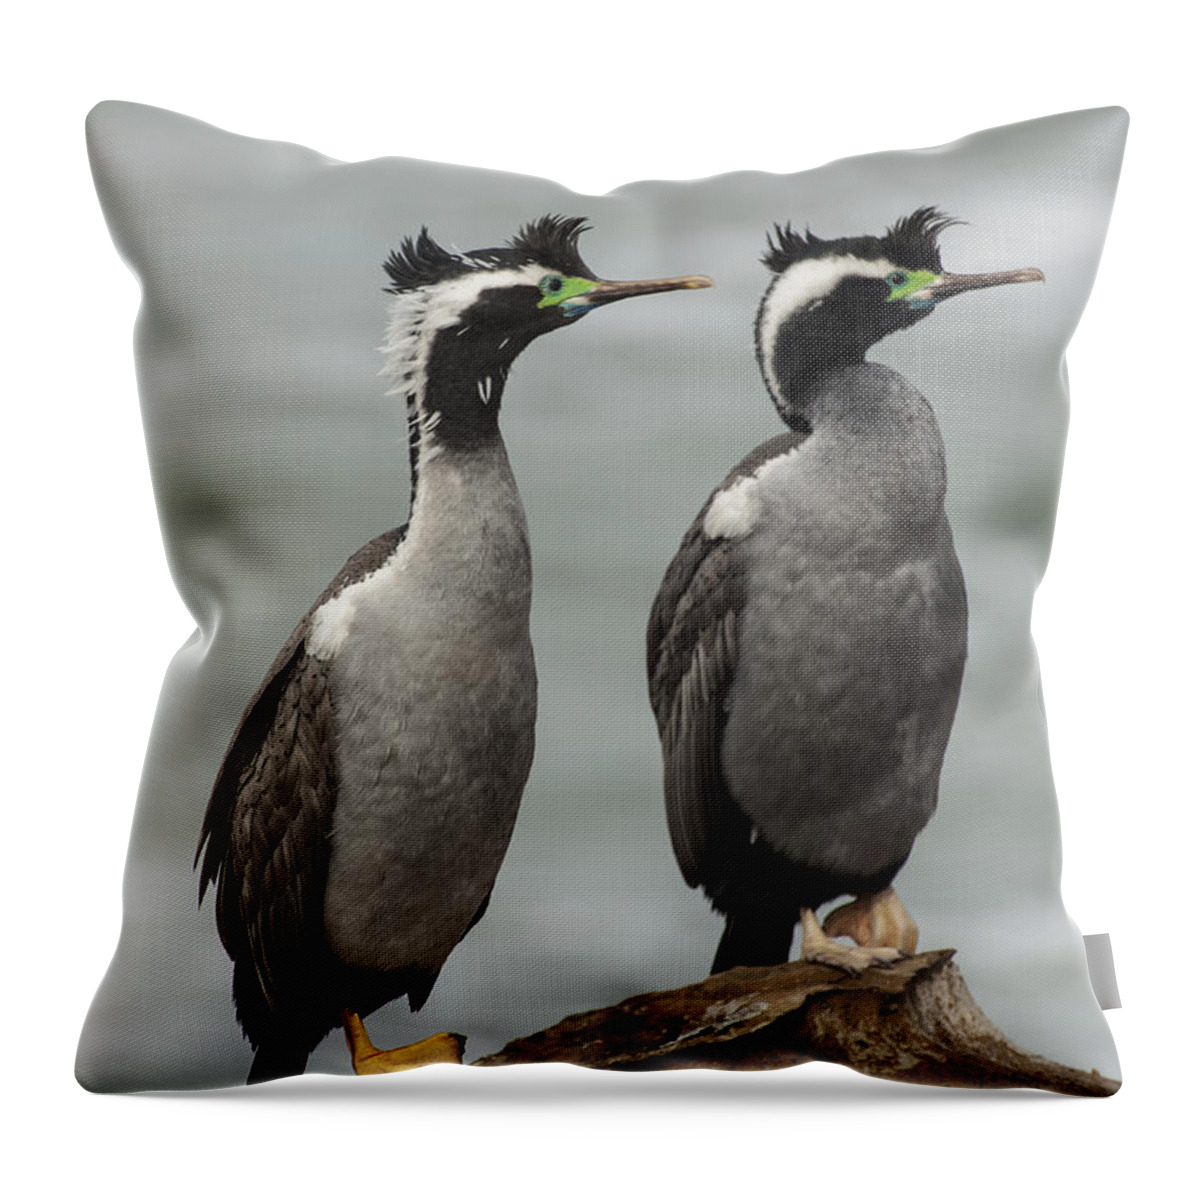 530838 Throw Pillow featuring the photograph Spotted Shags At Shag Point Otago New by Colin Monteath